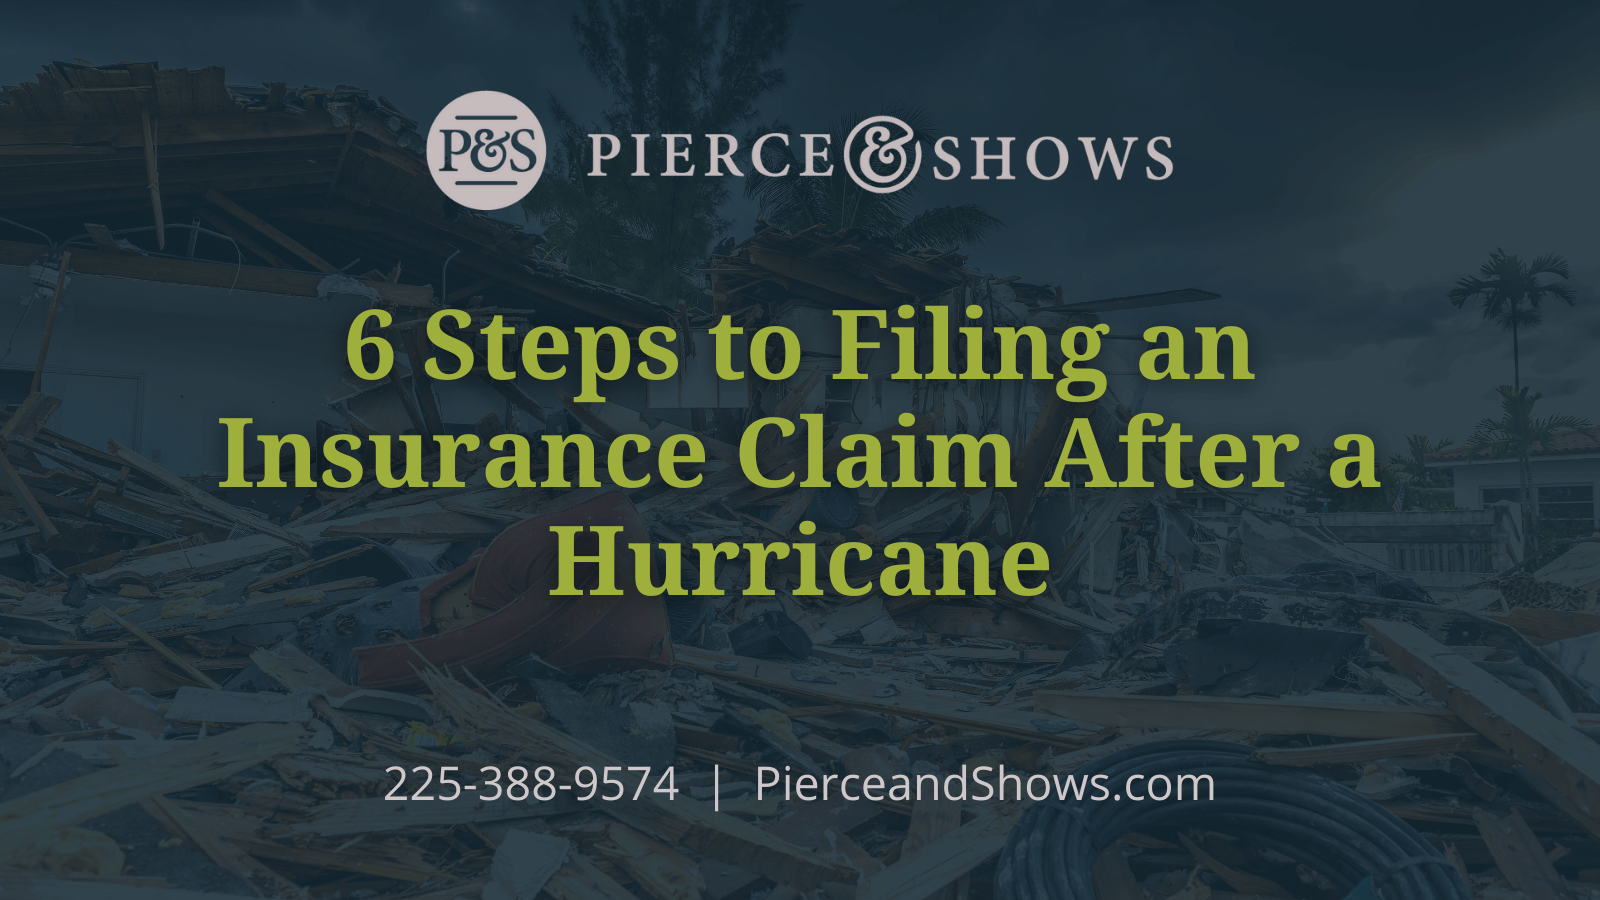 6 Steps to Filing an Insurance Claim After a Hurricane- Baton Rouge Louisiana injury attorney Pierce & Shows (1)